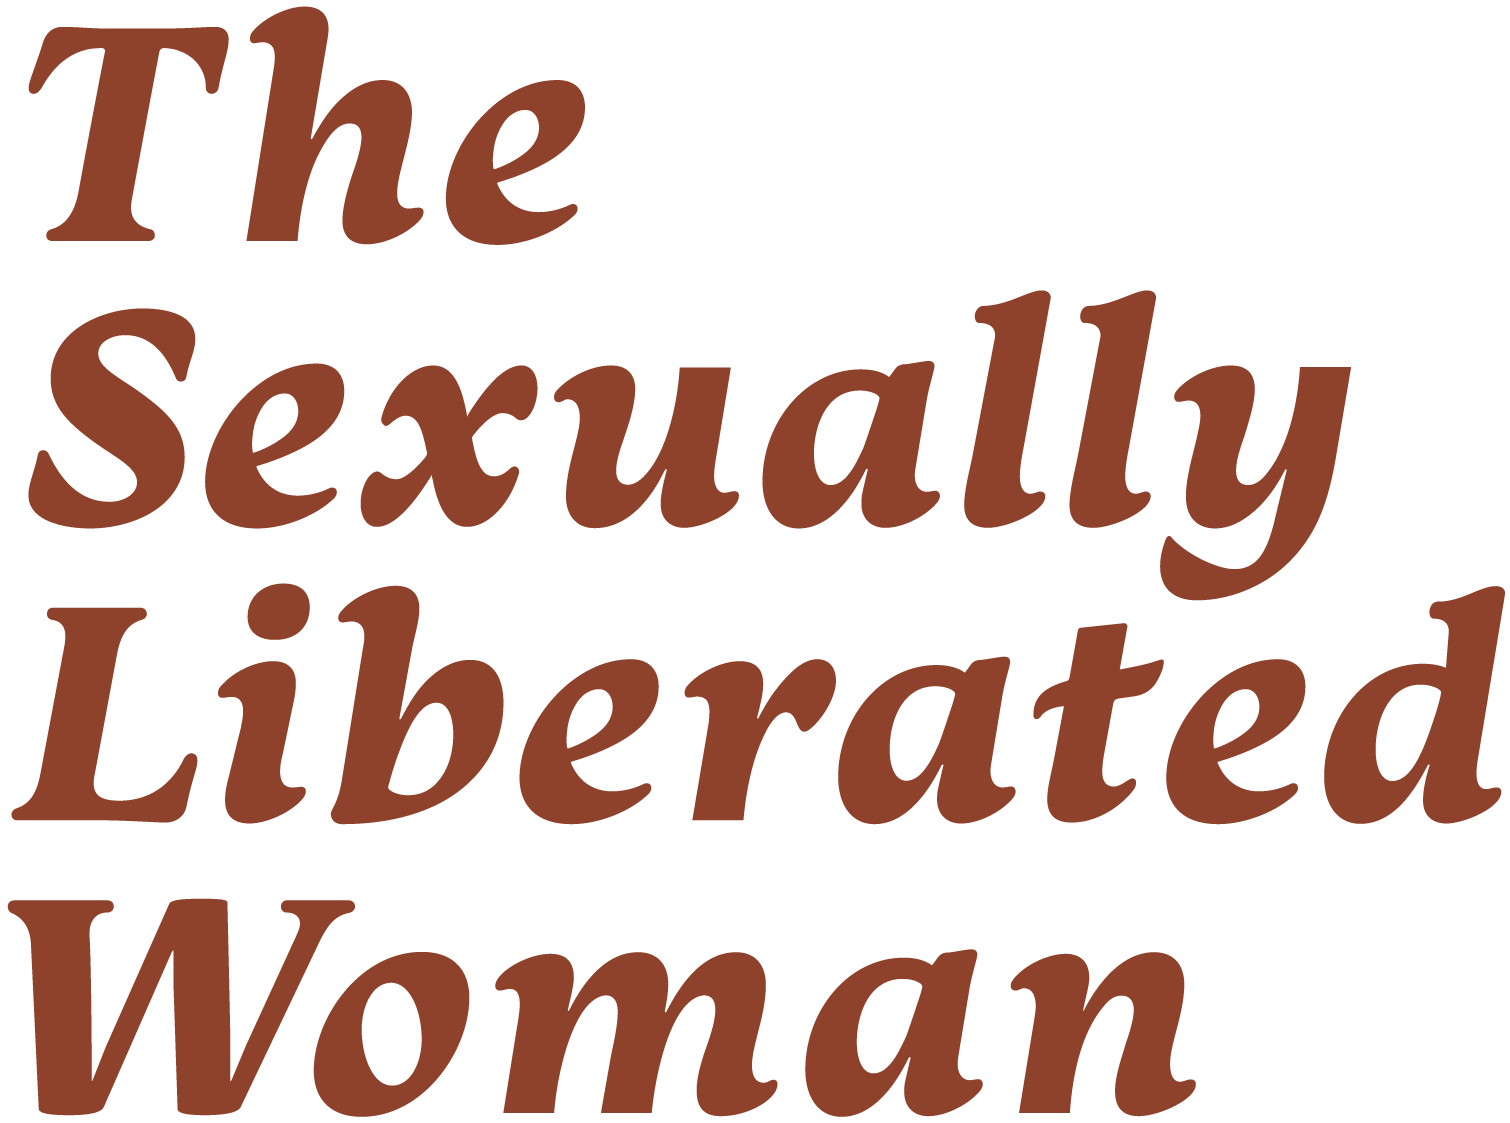 The Sexually Liberated Woman